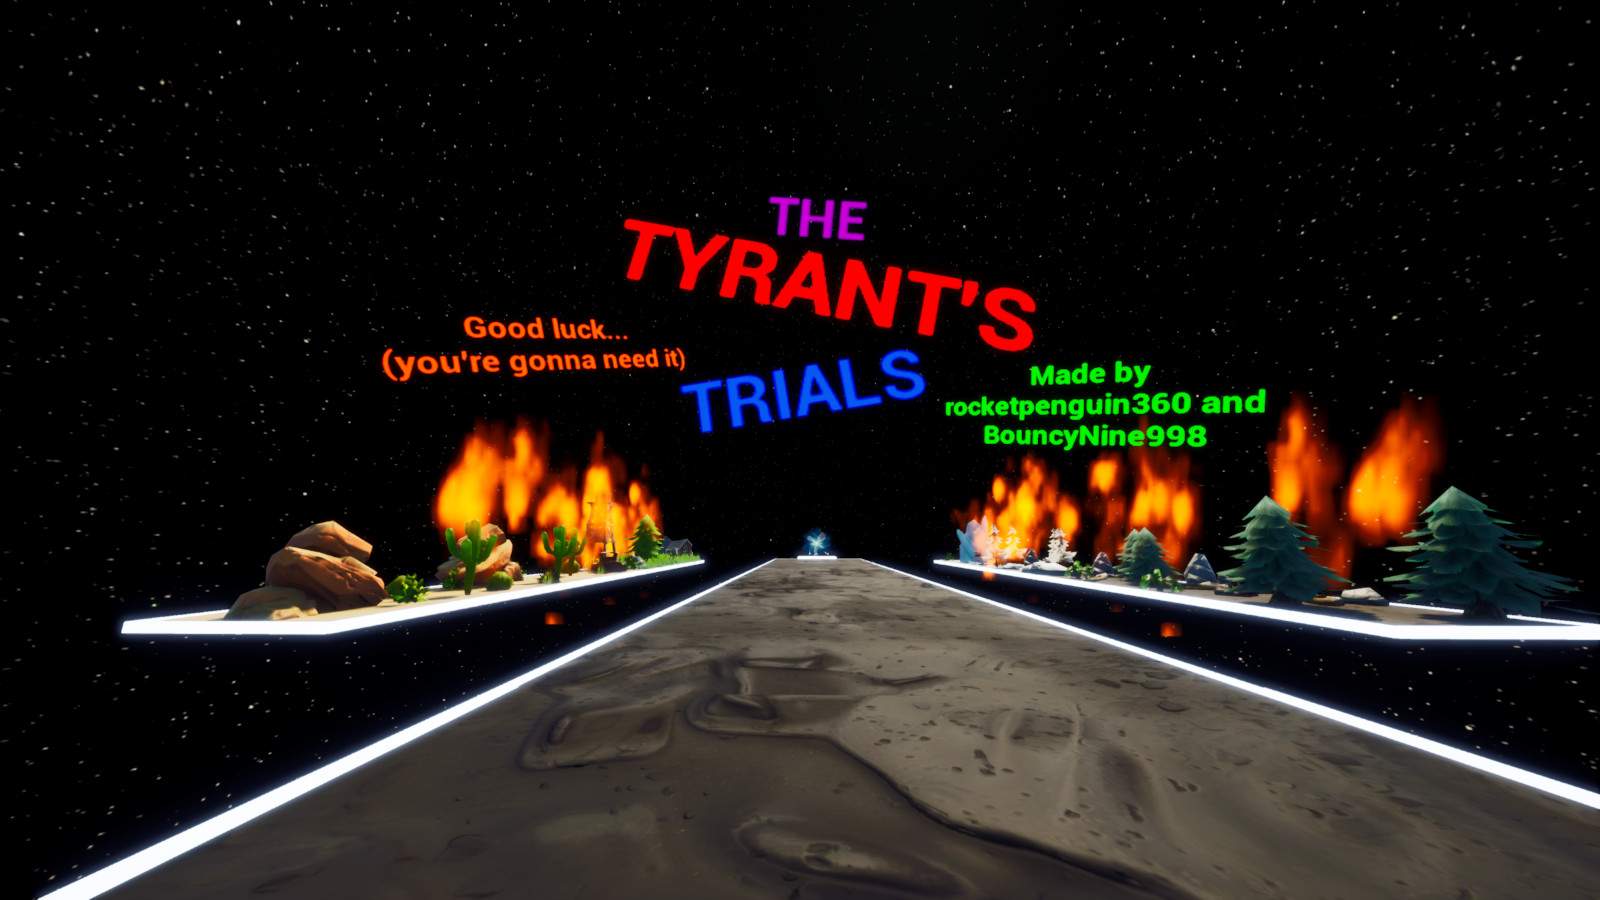 THE TYRANT'S TRIALS